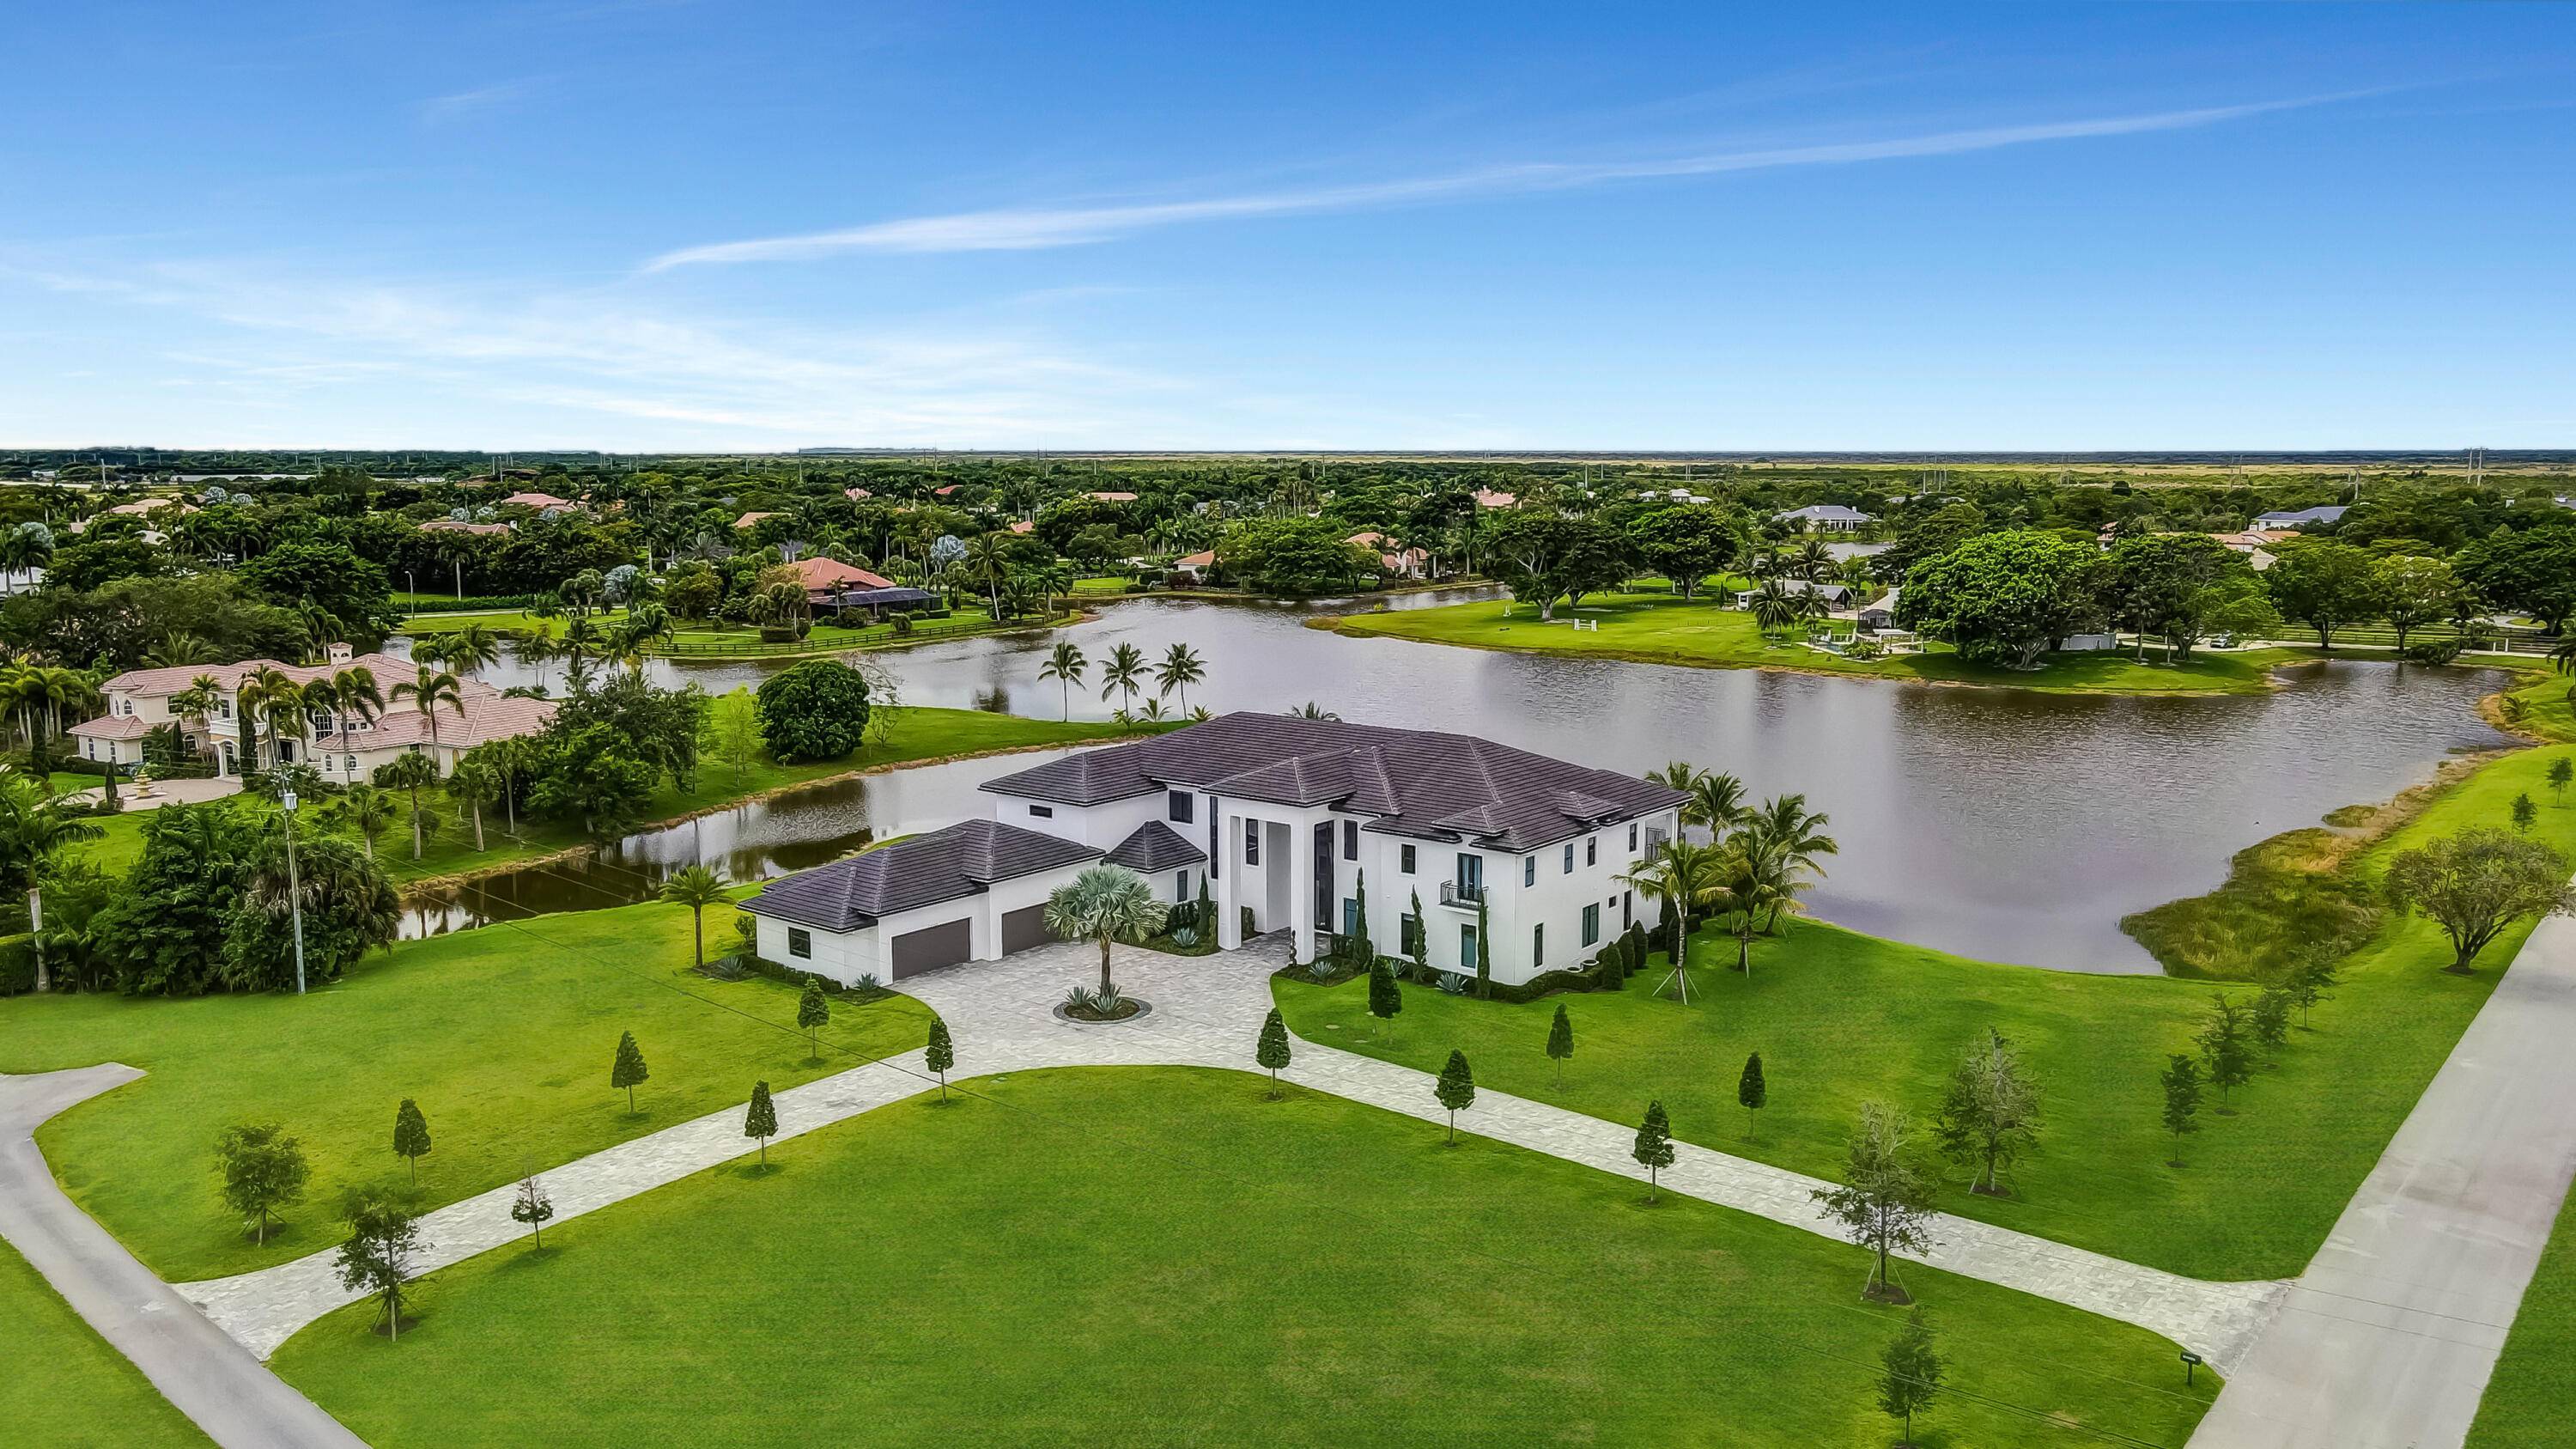 NEW CUSTOM FURNISHED LUXURY ESTATE SITUATED ON 2 ACRES OF LAND WITH ONE OF THE BEST LAKE FRONT LOTS IN ALL OF SOUTH FLORIDA WITH BREATHTAKING VIEWS.